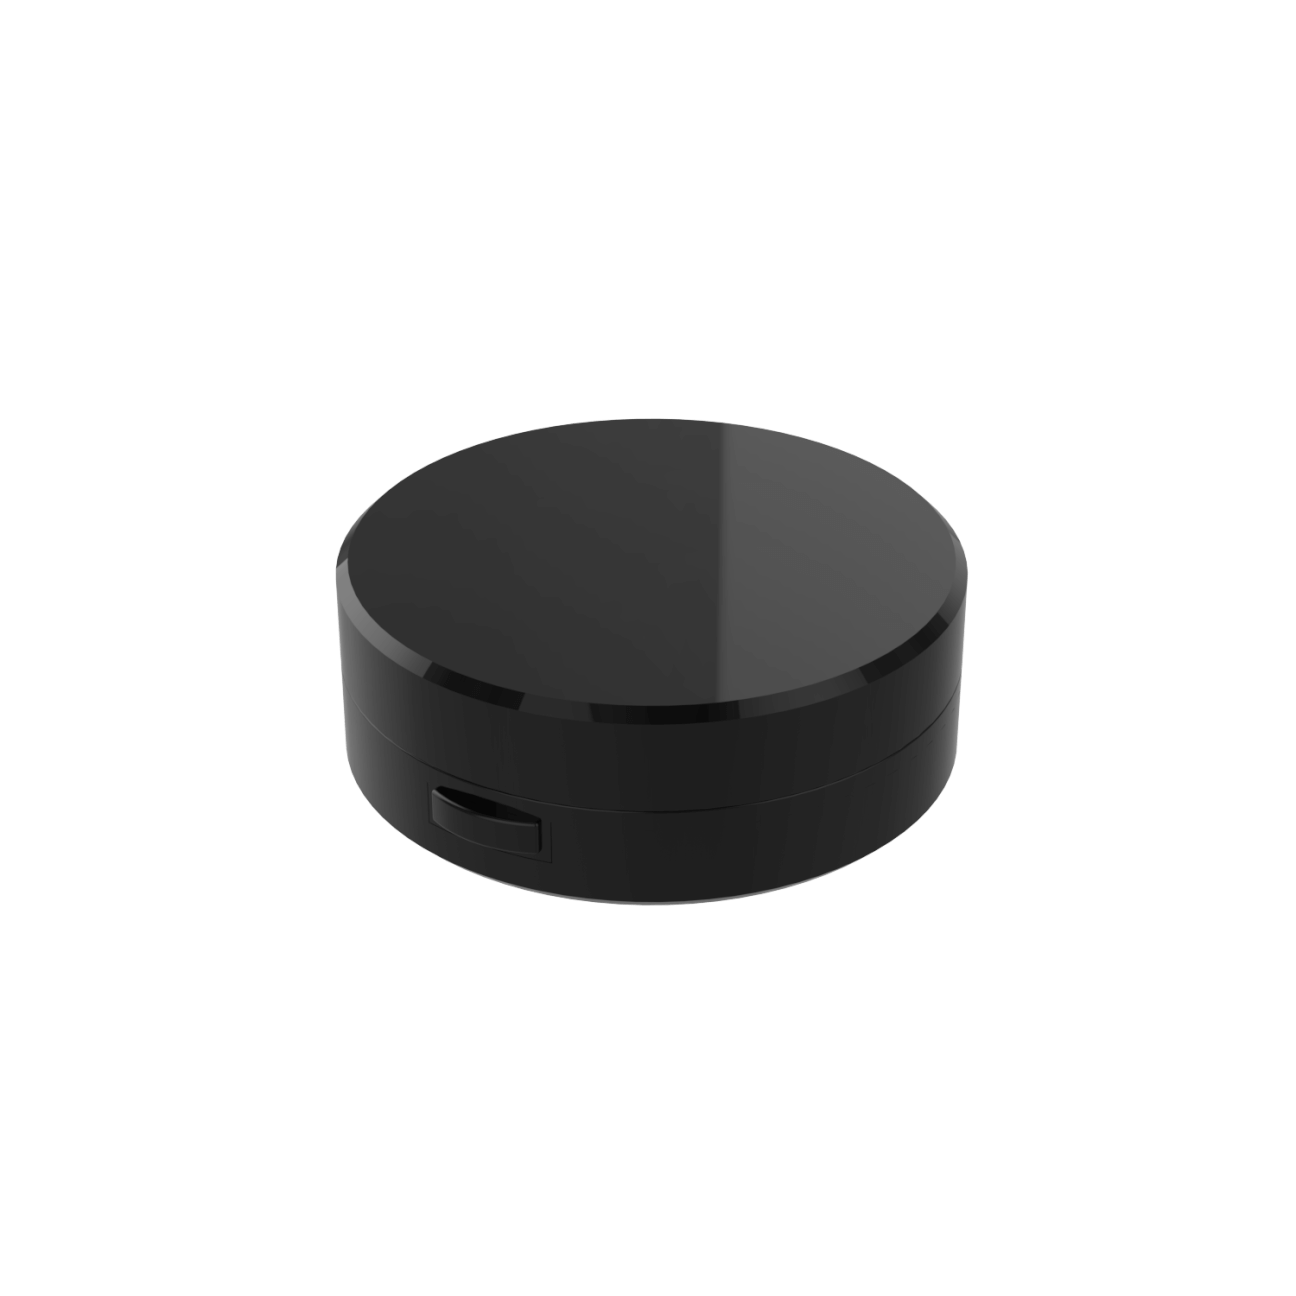 Grinder 1 Hole Compact A 25g's thumbnail image